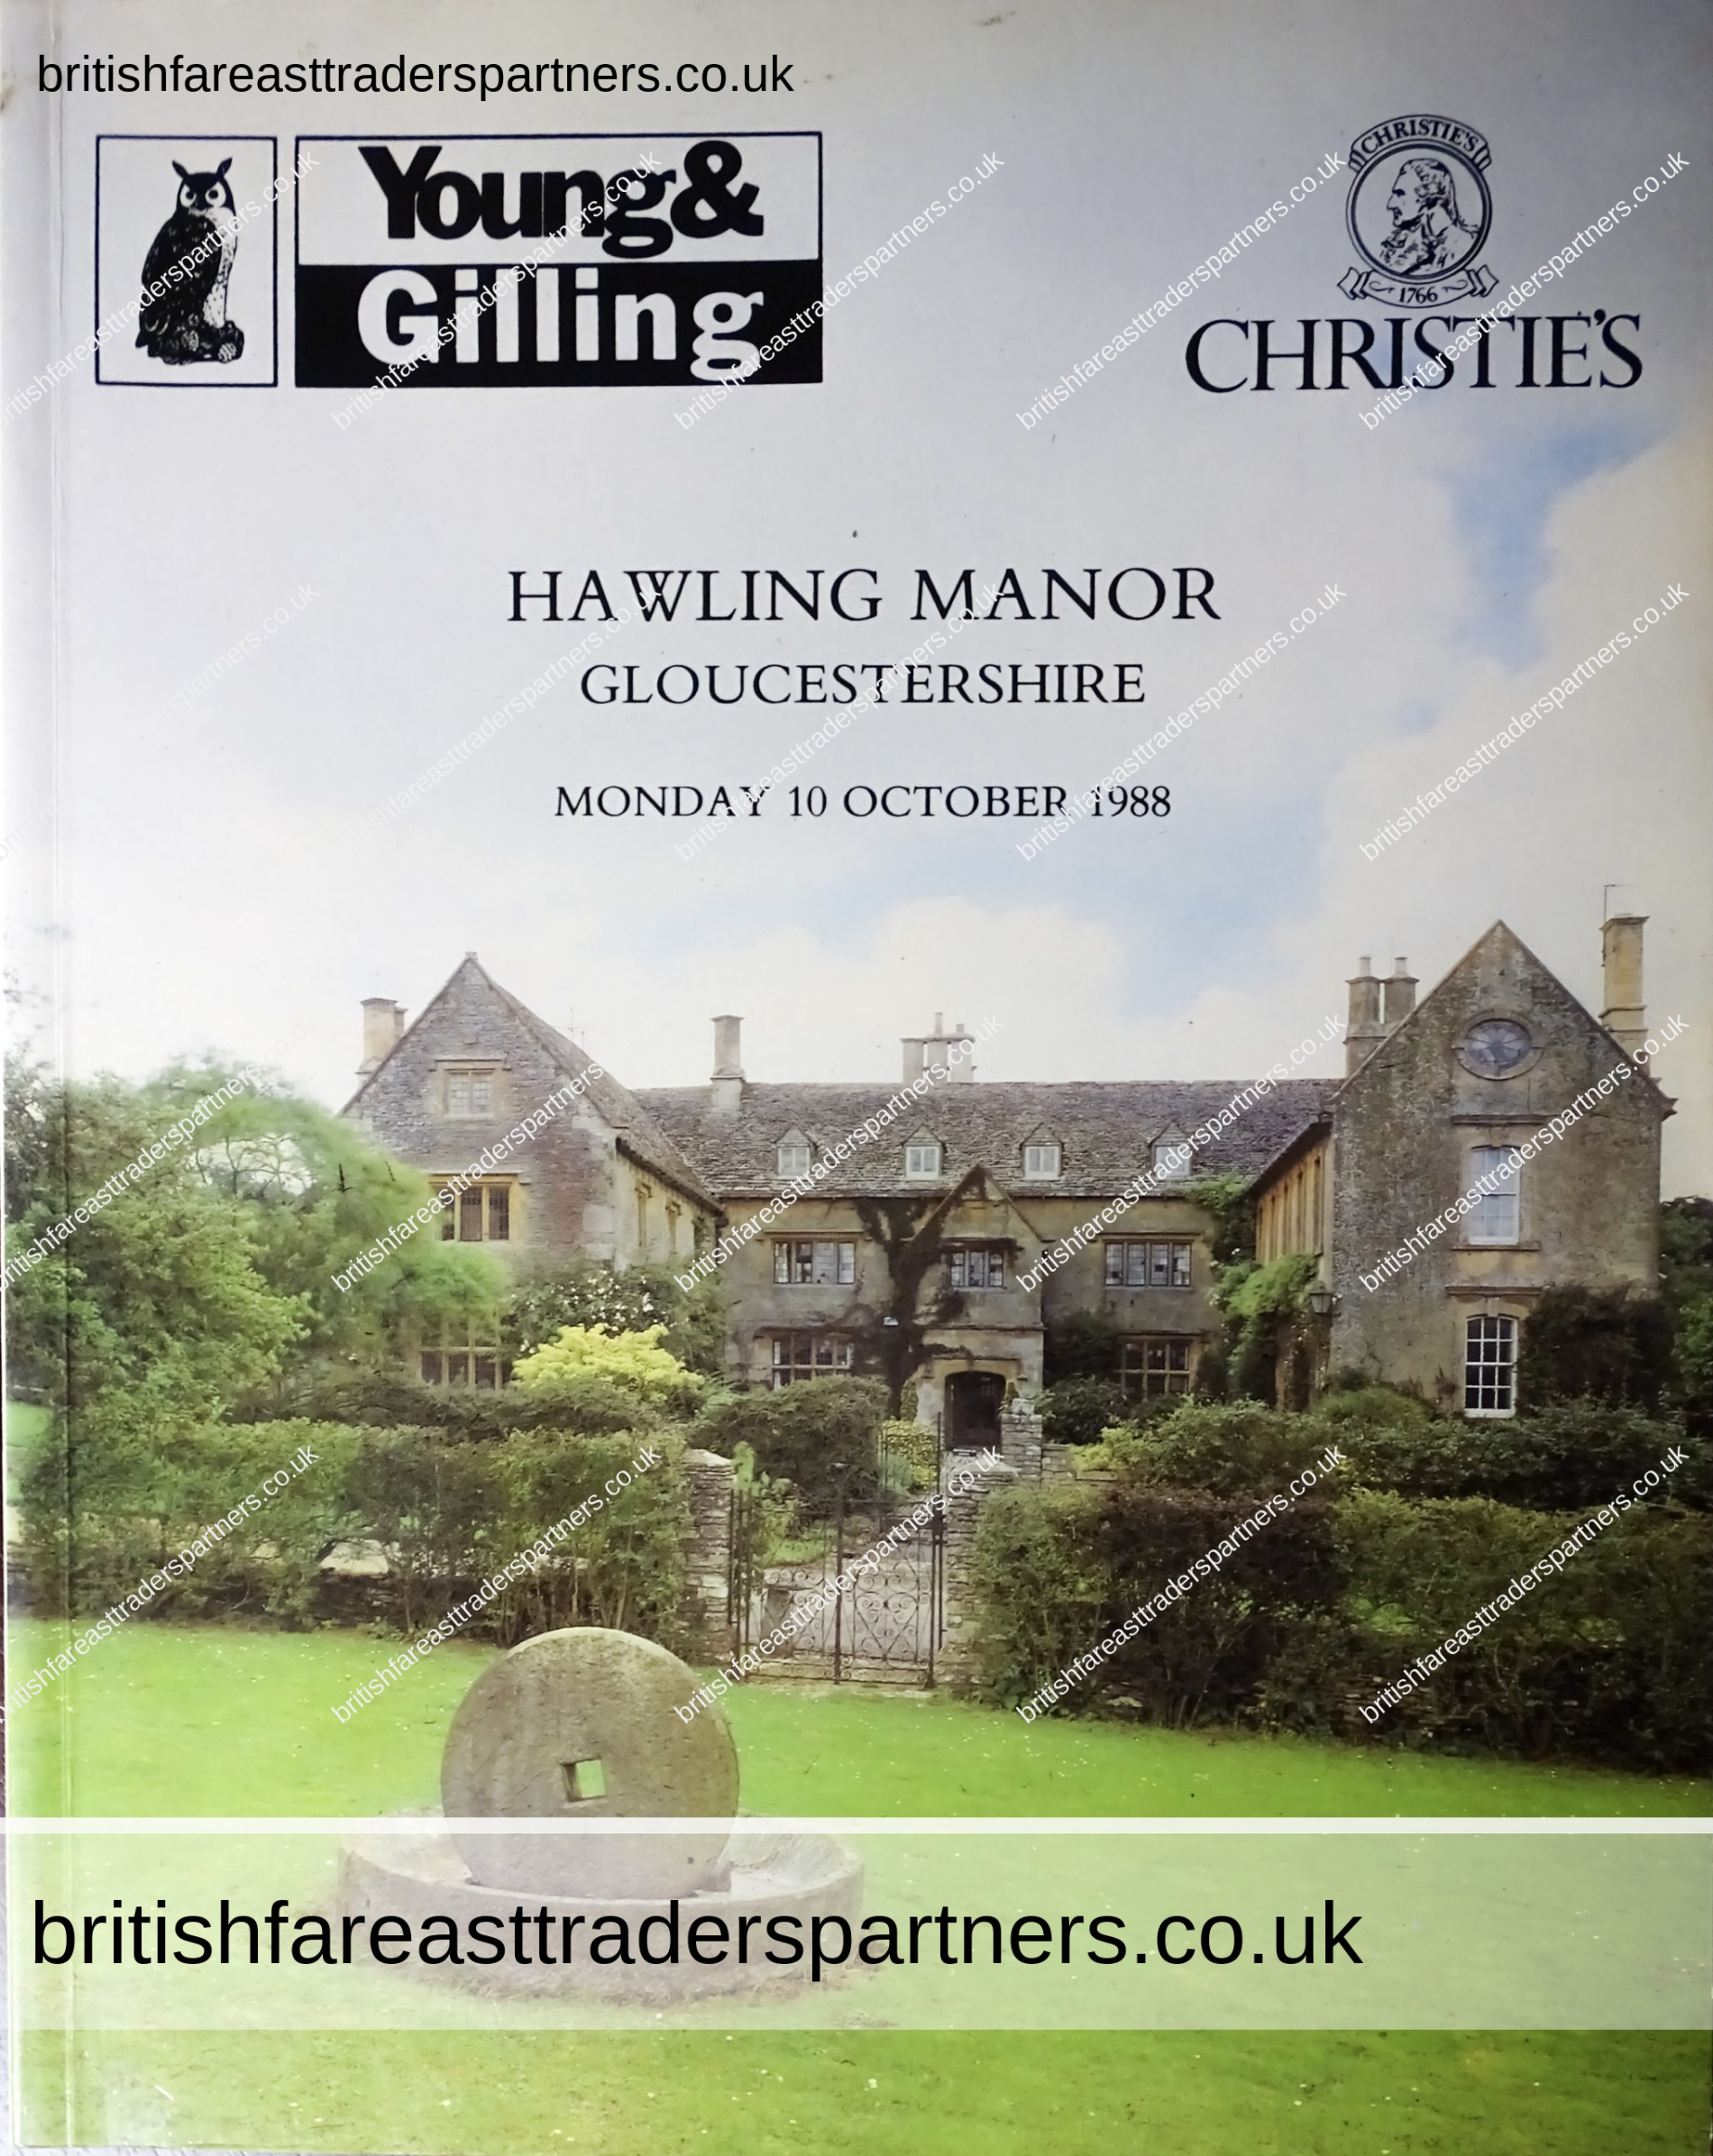 VINTAGE 10 OCTOBER 1988 Hawling Manor GLOUCESTERSHIRE PROPERTY of the Late Mrs. J.H. DENT-BROCKLEHURST CHRISTIES’S SOUNTH KENSINGTON LTD. LONDON In Association With YOUNG AND GILLING CHELTENHAM AUCTION Catalogue